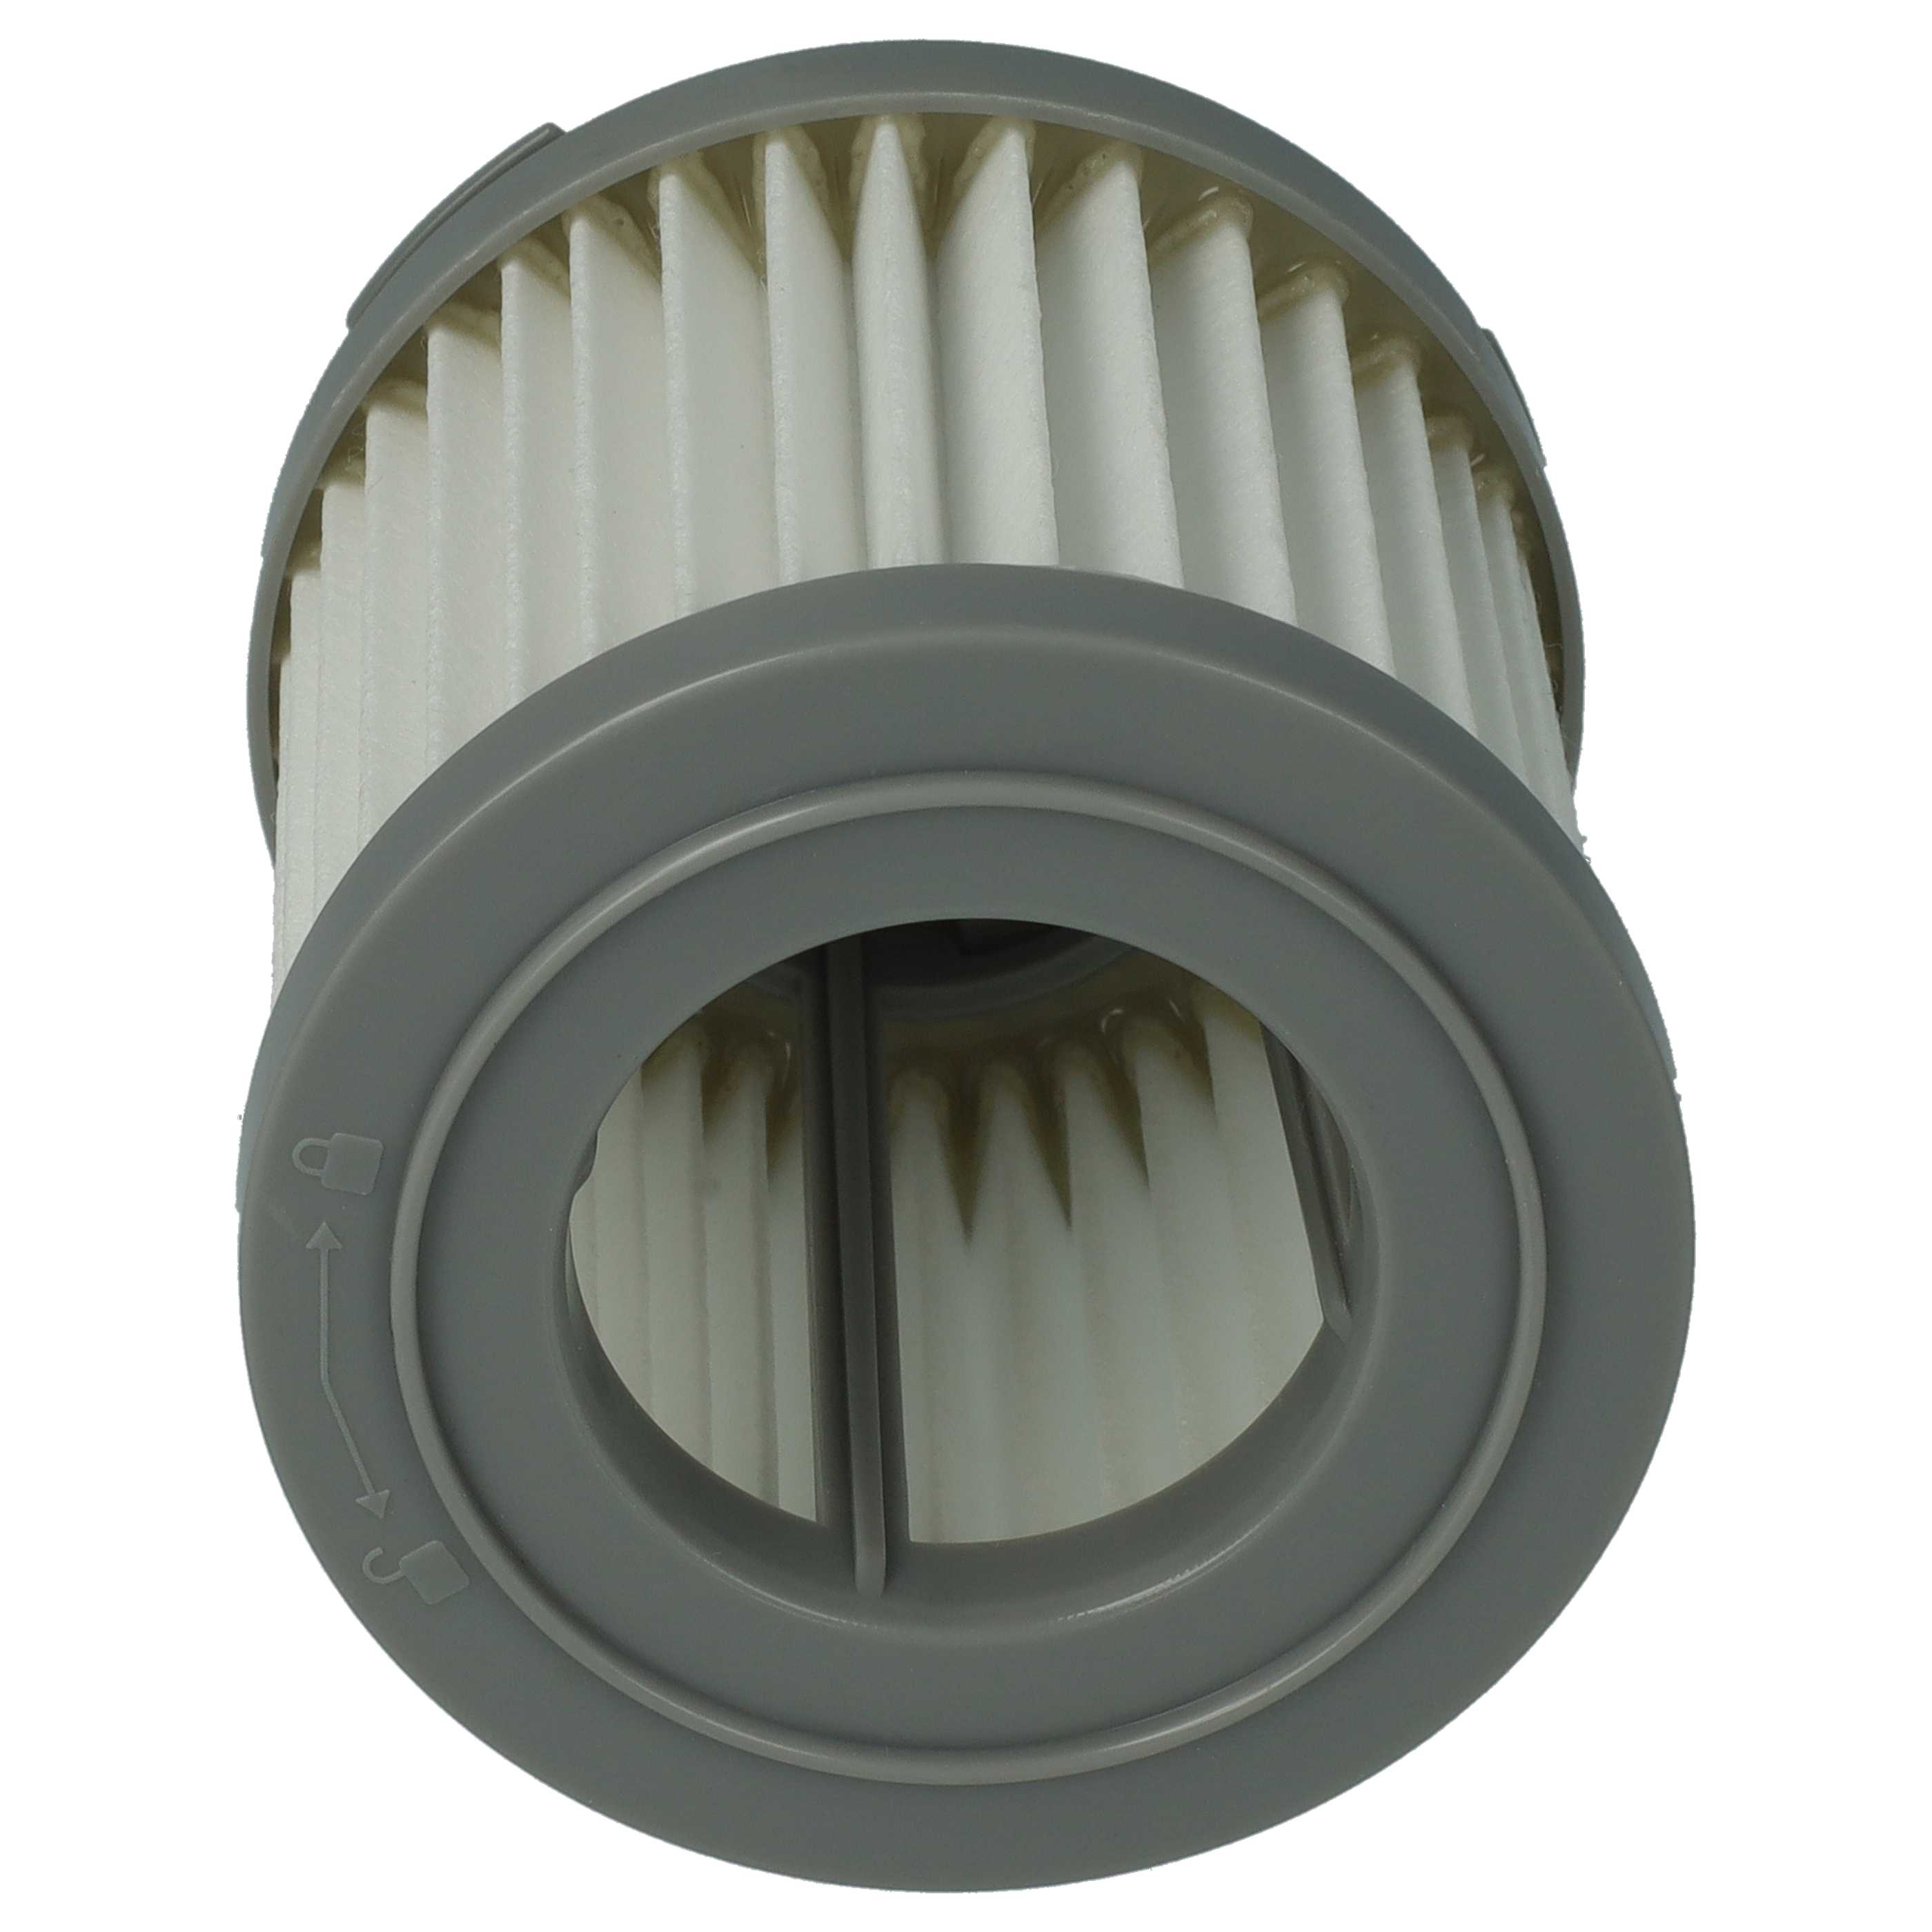 1x HEPA filter replaces AEG 4055453288 for AEGVacuum Cleaner, white / grey